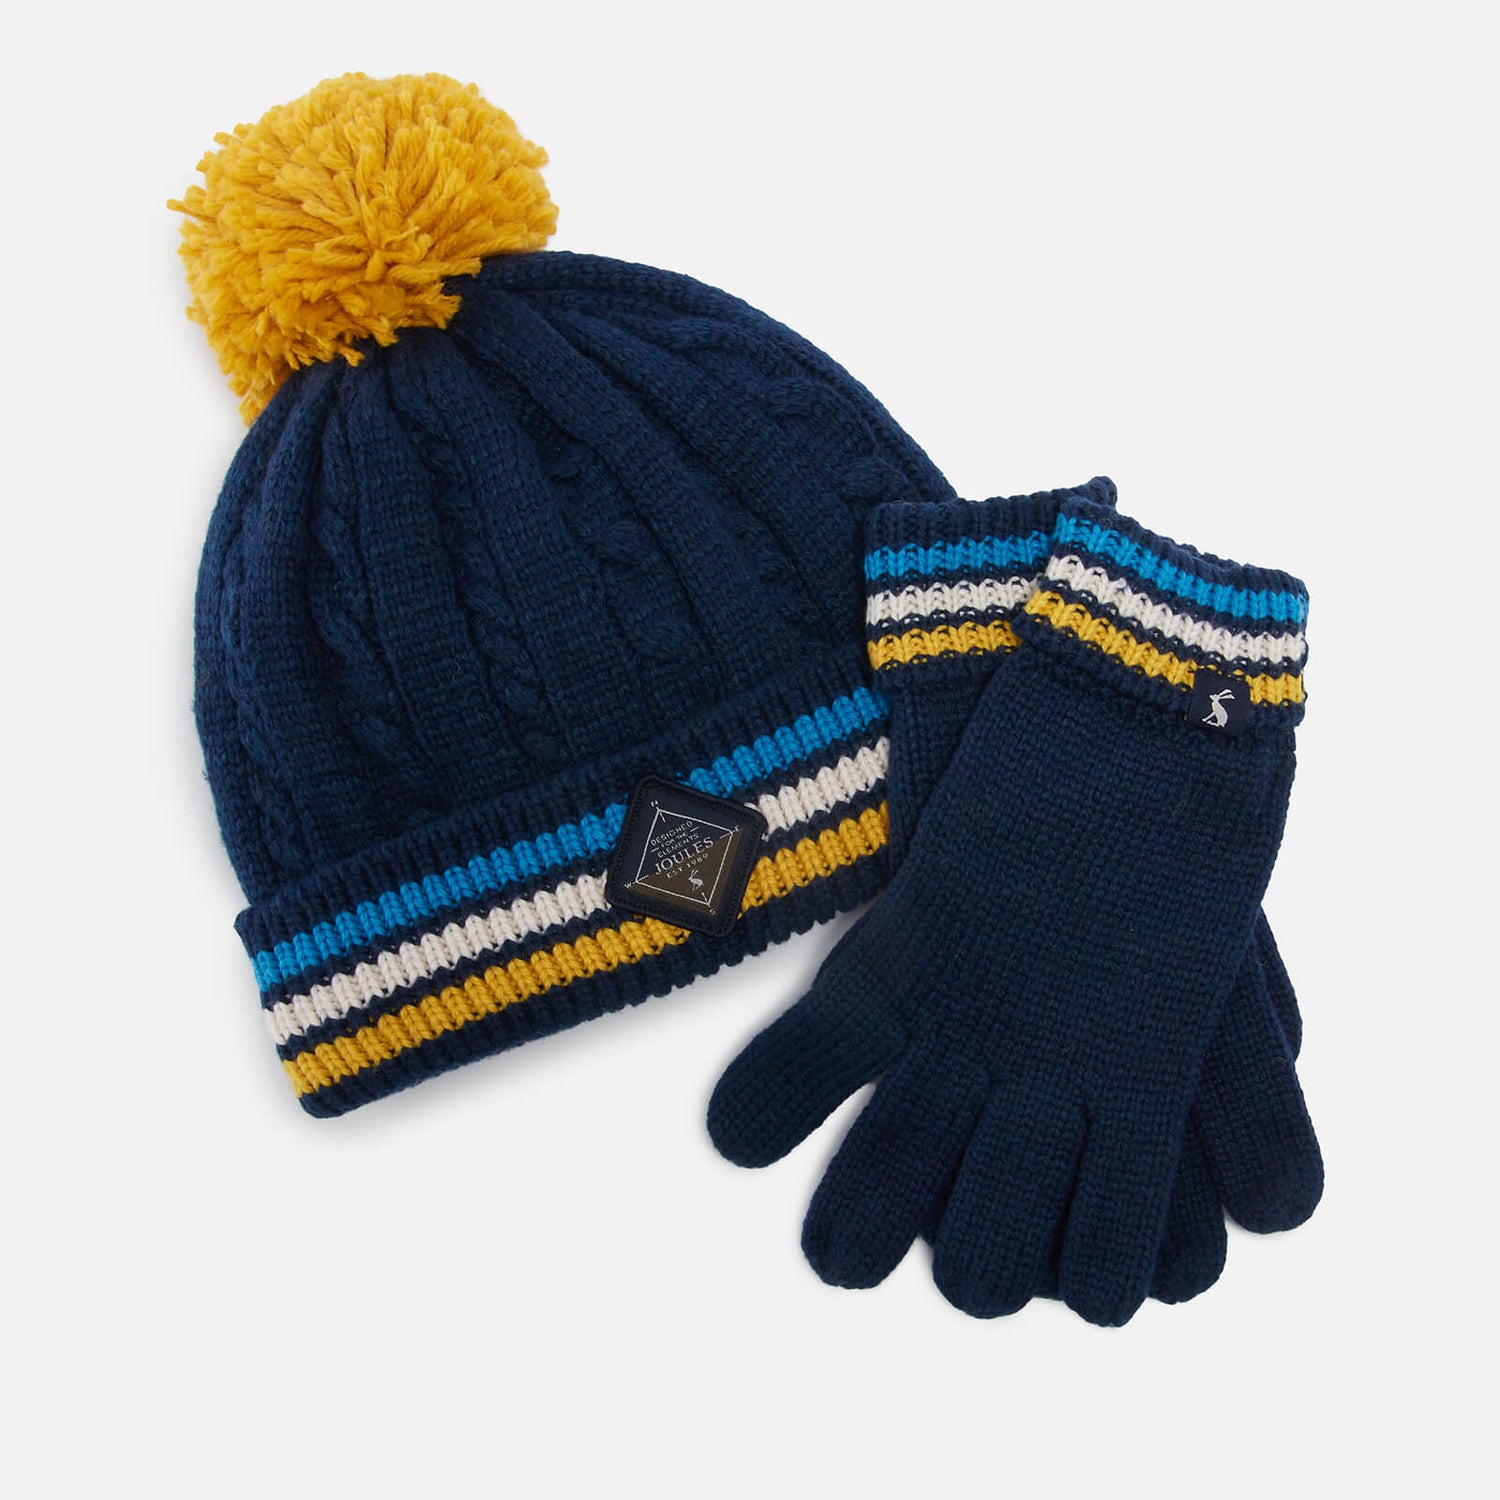 Joules Kids' Hartlow Knit Hat and Gloves Set